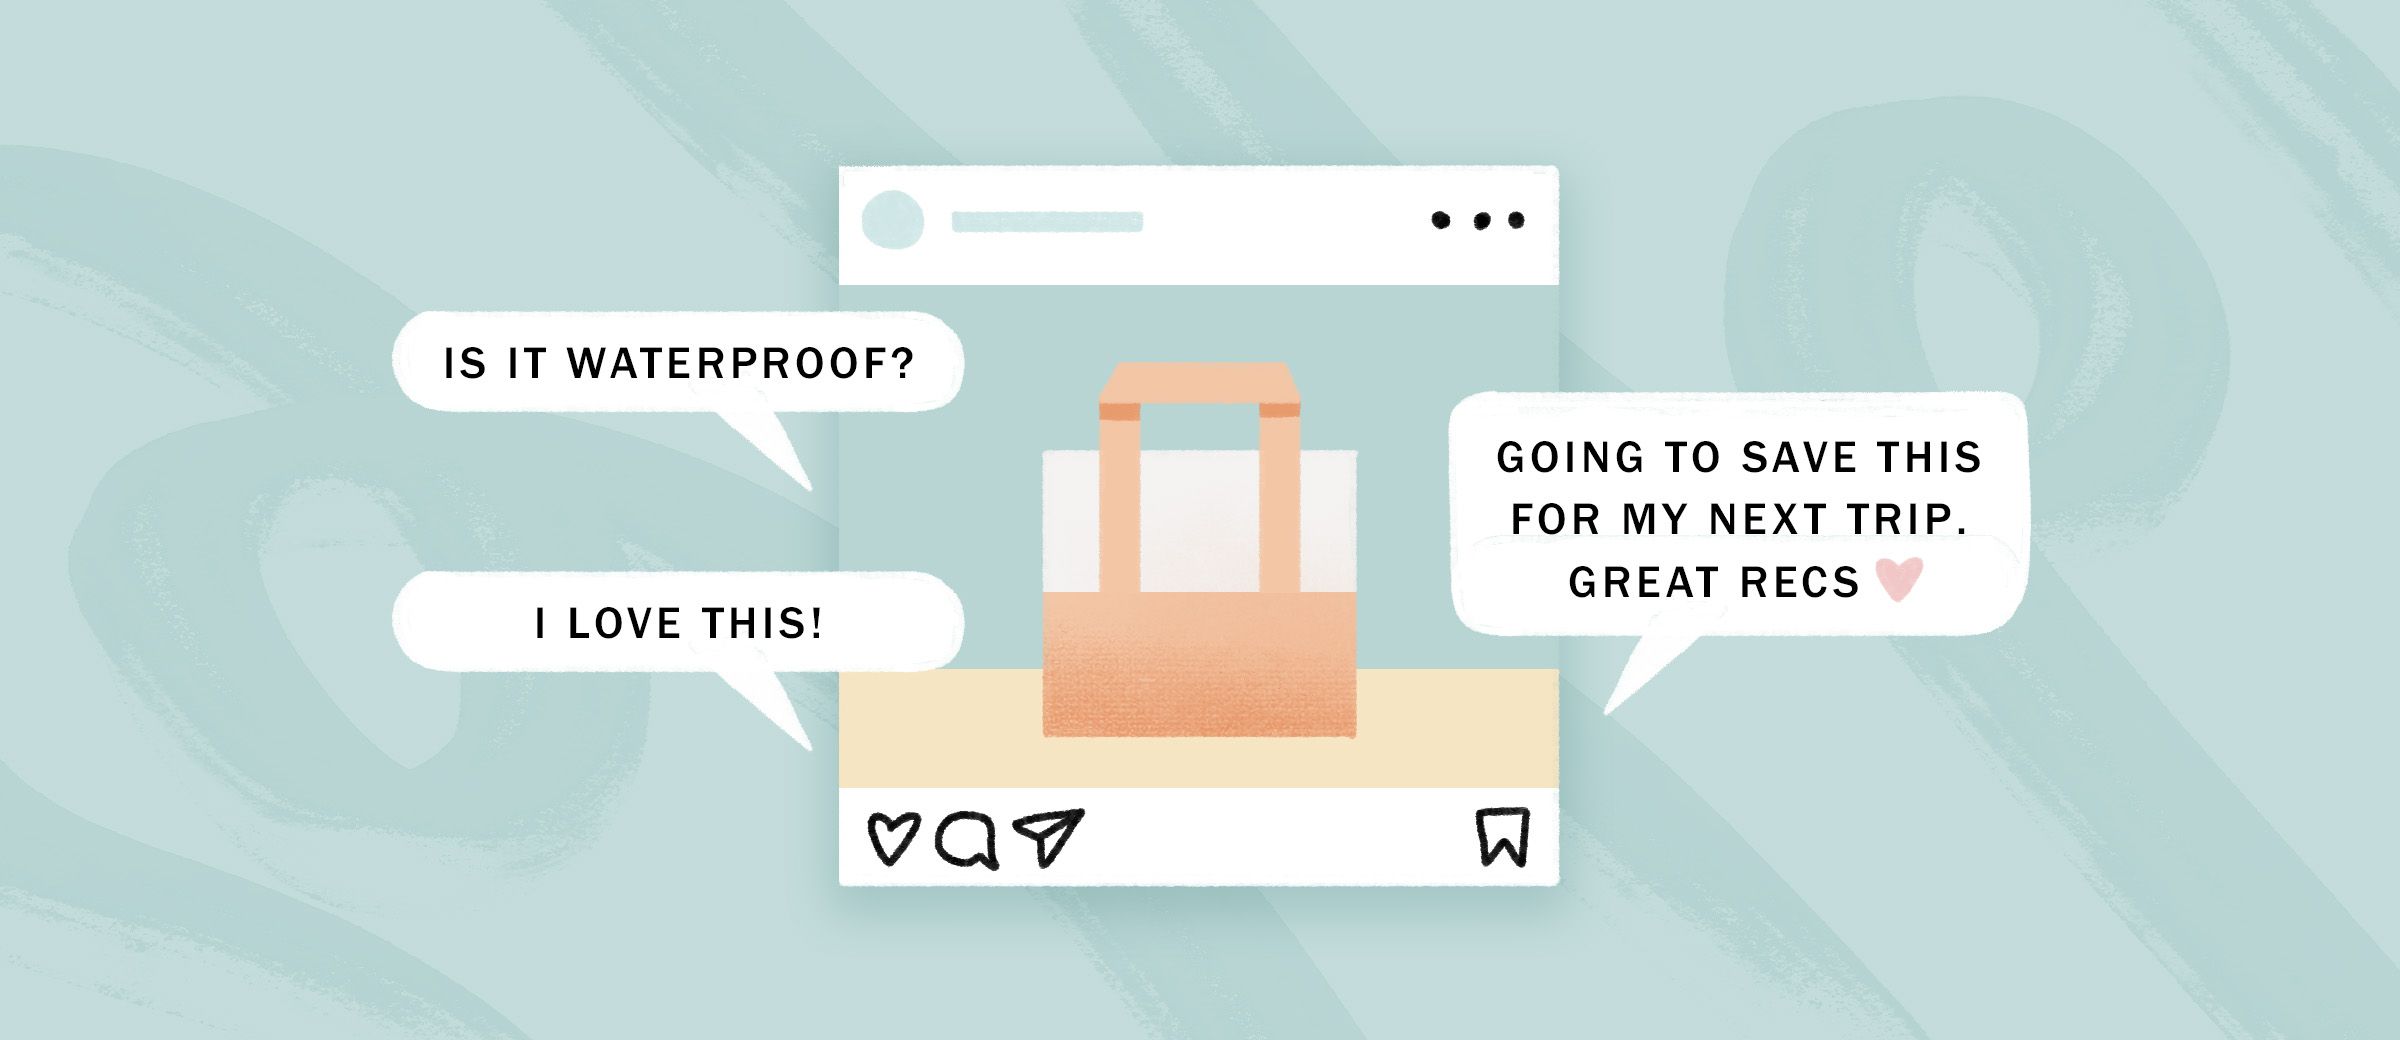 11 Tips on How to Get Engaged Followers on Instagram